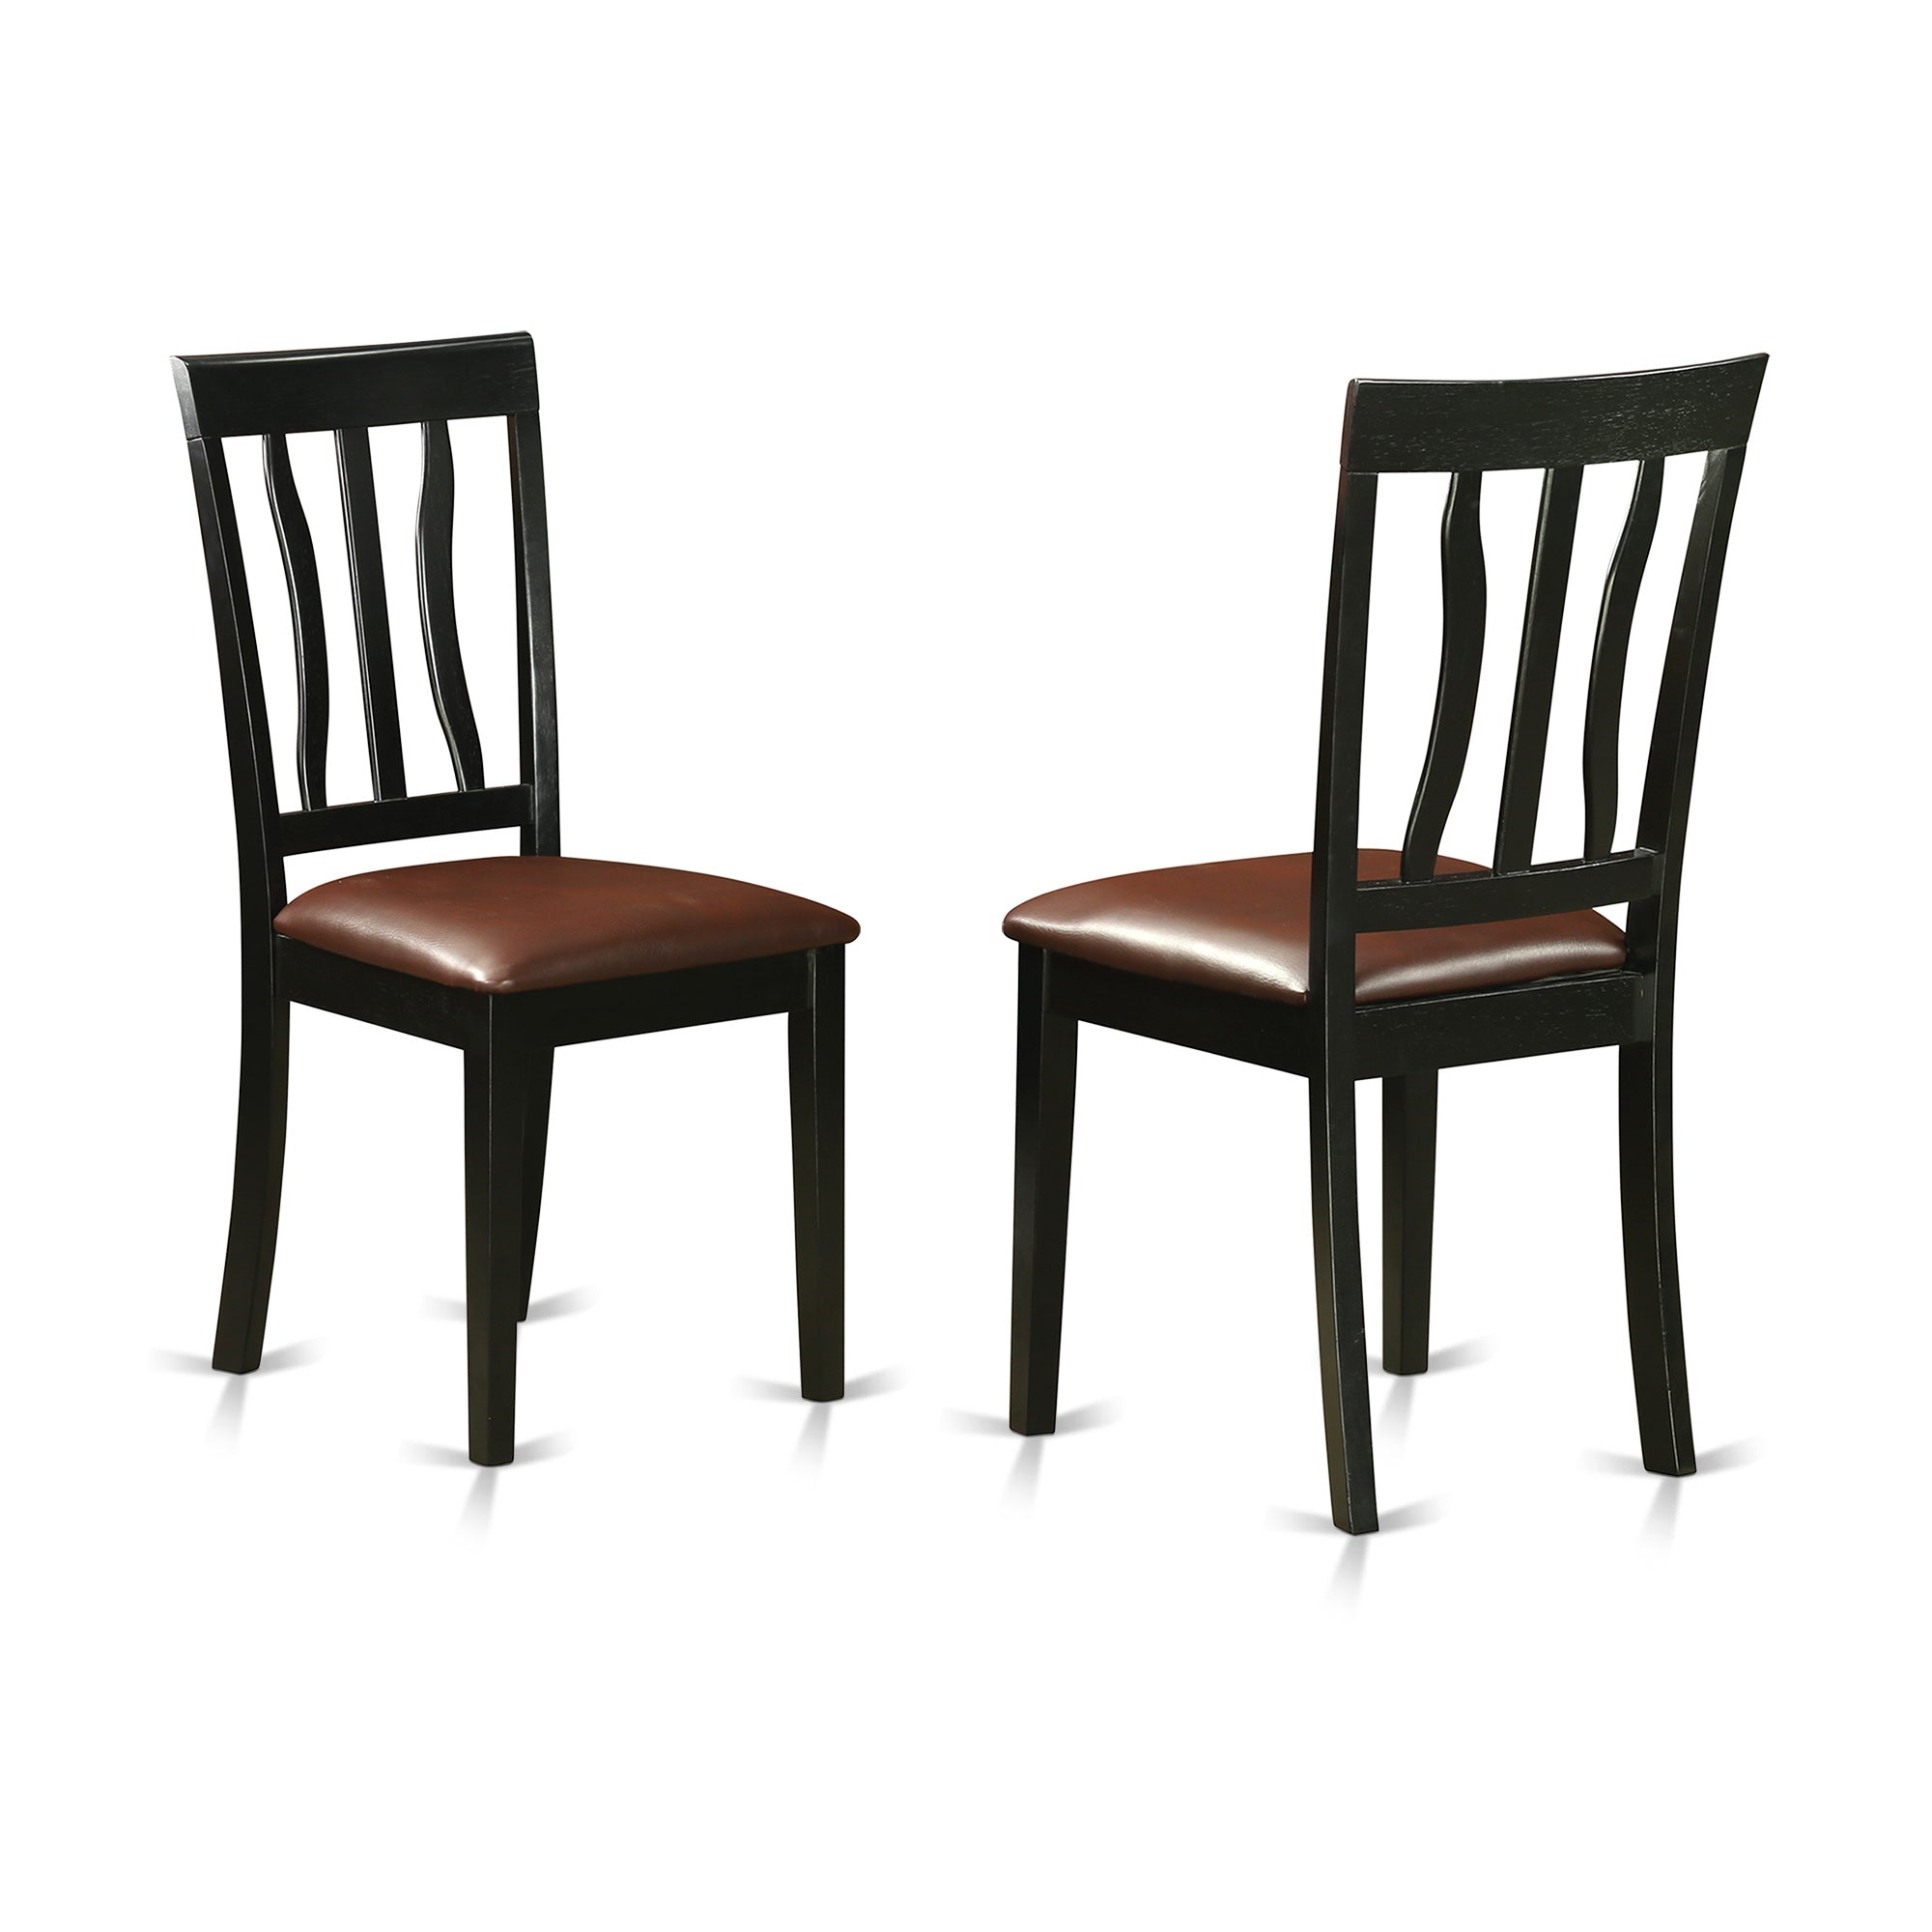 LGAN7-BCH-LC 7 Pc Table set with a Dining Table and 6 Dining Chairs in Black and Cherry